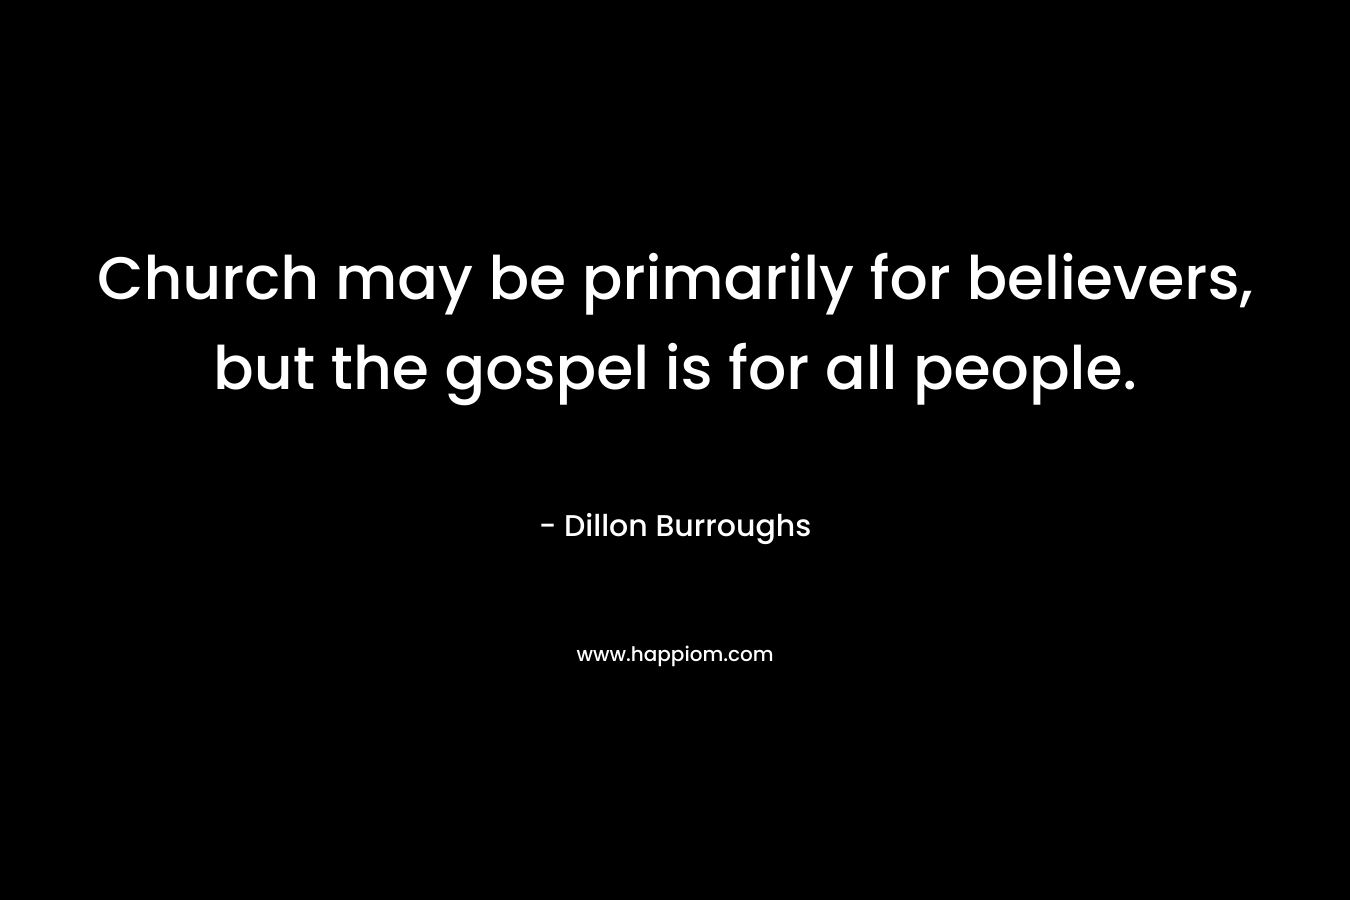 Church may be primarily for believers, but the gospel is for all people.